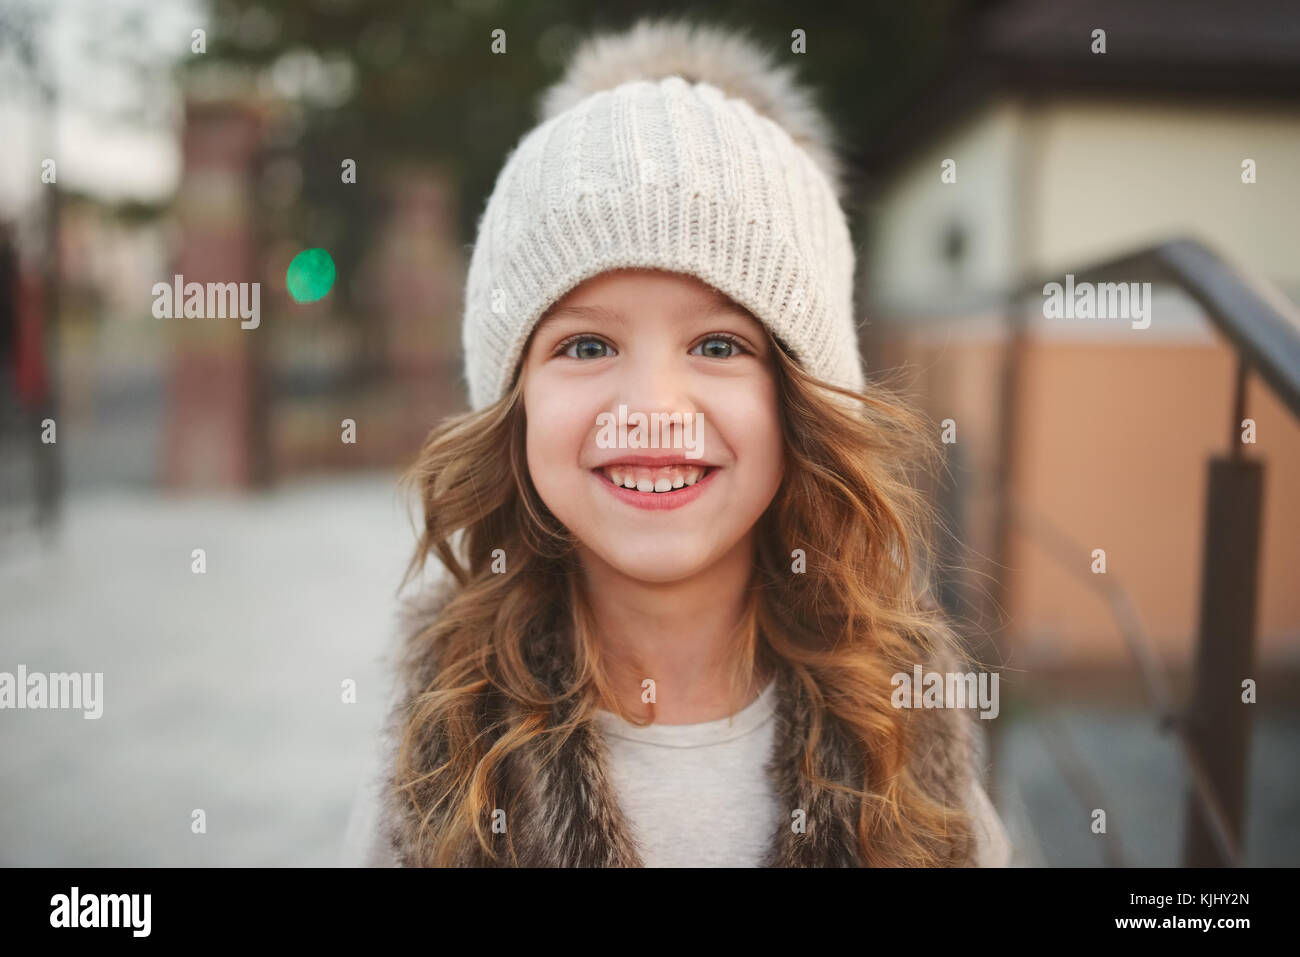 cute little girl with knitted hat Stock Photo